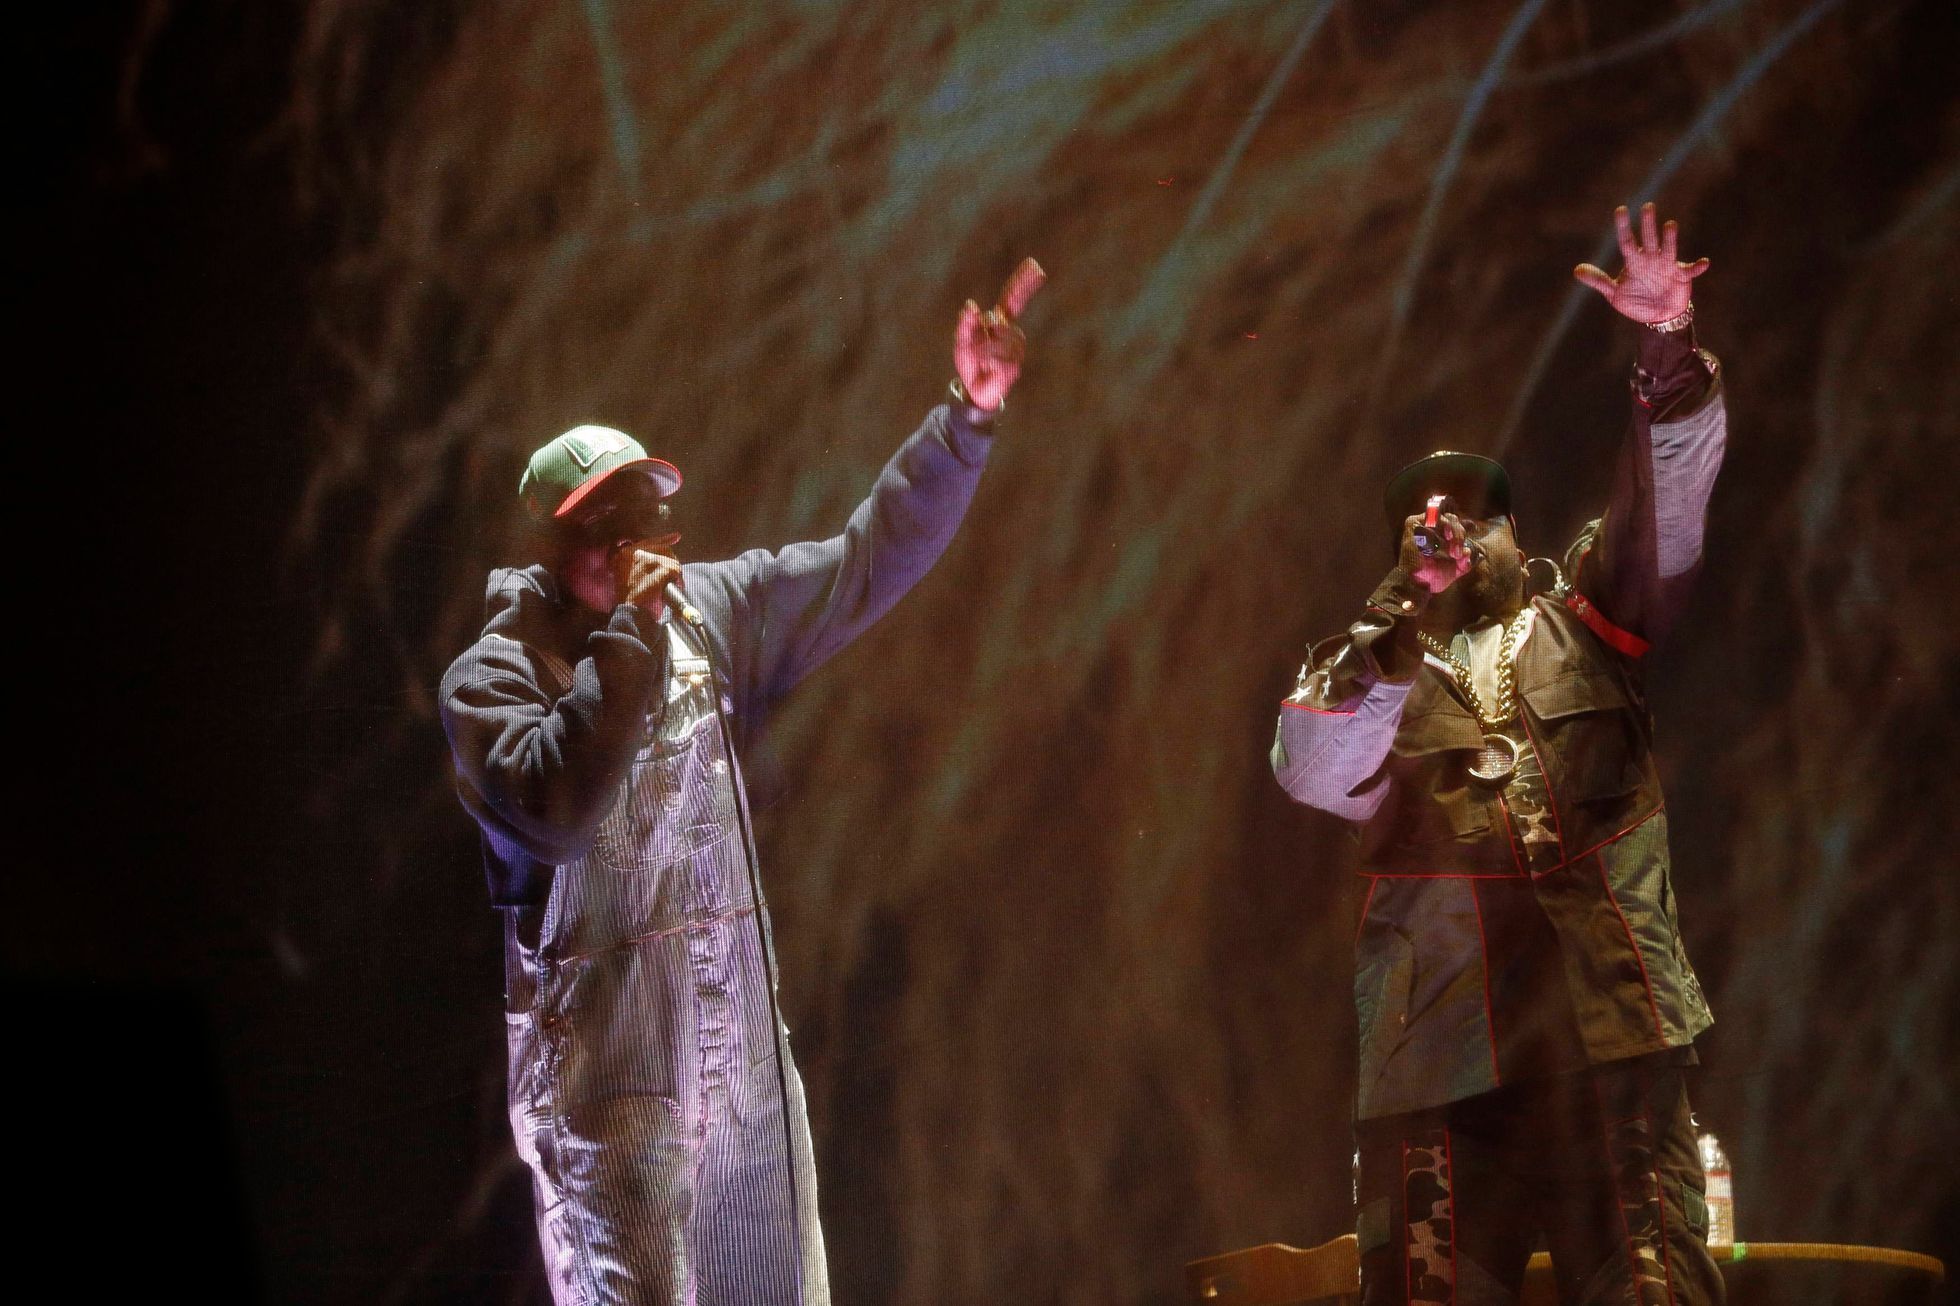 Big Boi and Andre 3000 of Outkast perform at the Coachella Valley Music and Arts Festival in Indio